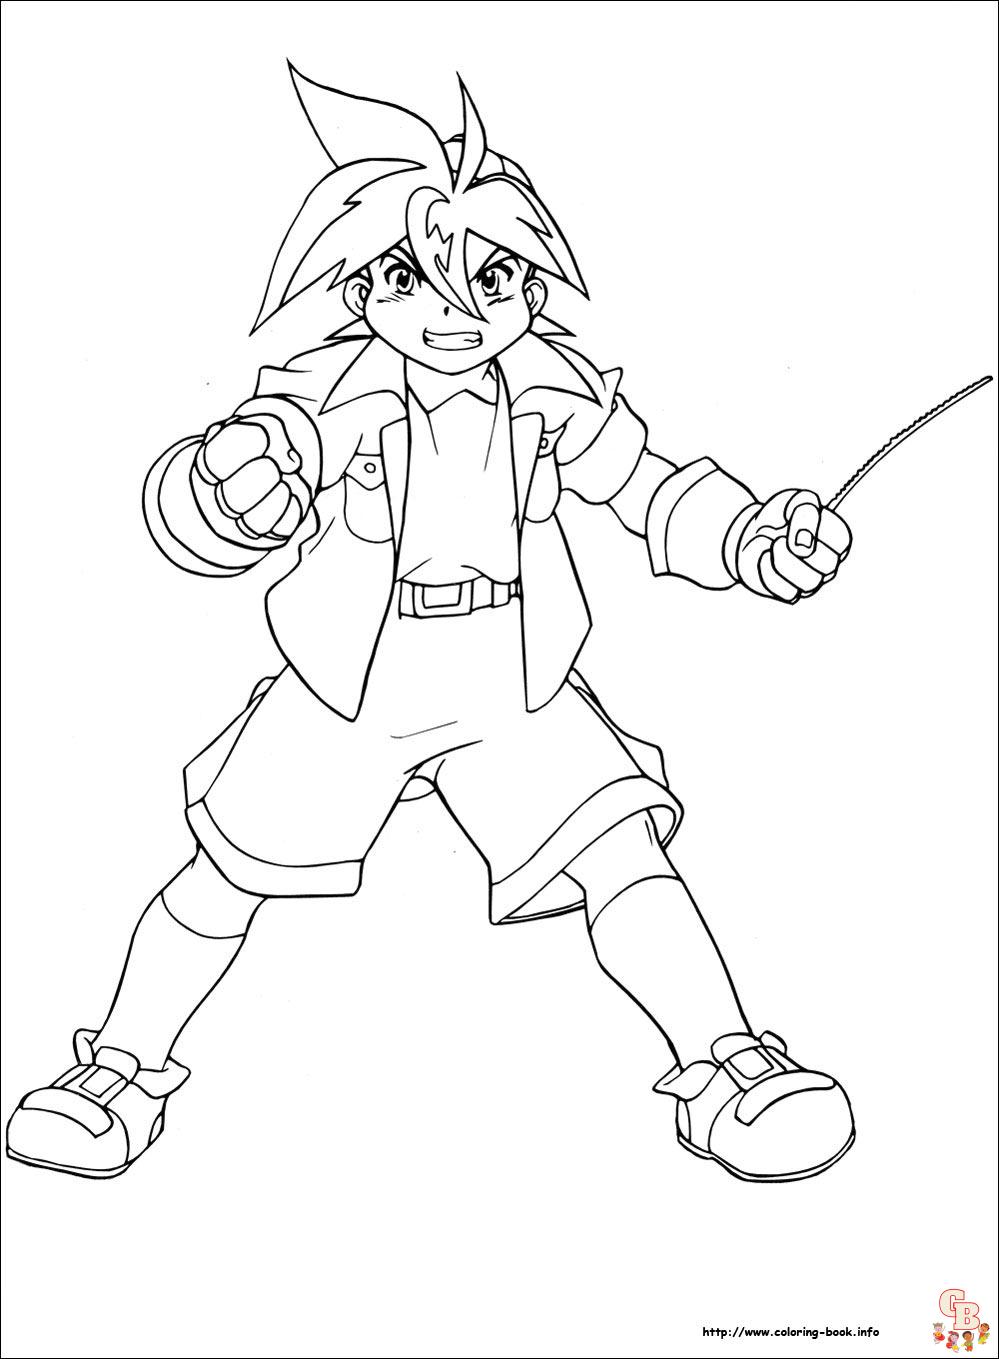 privatliv Monarch Henfald Beyblade Coloring Pages: Free Printable Sheets for Kids